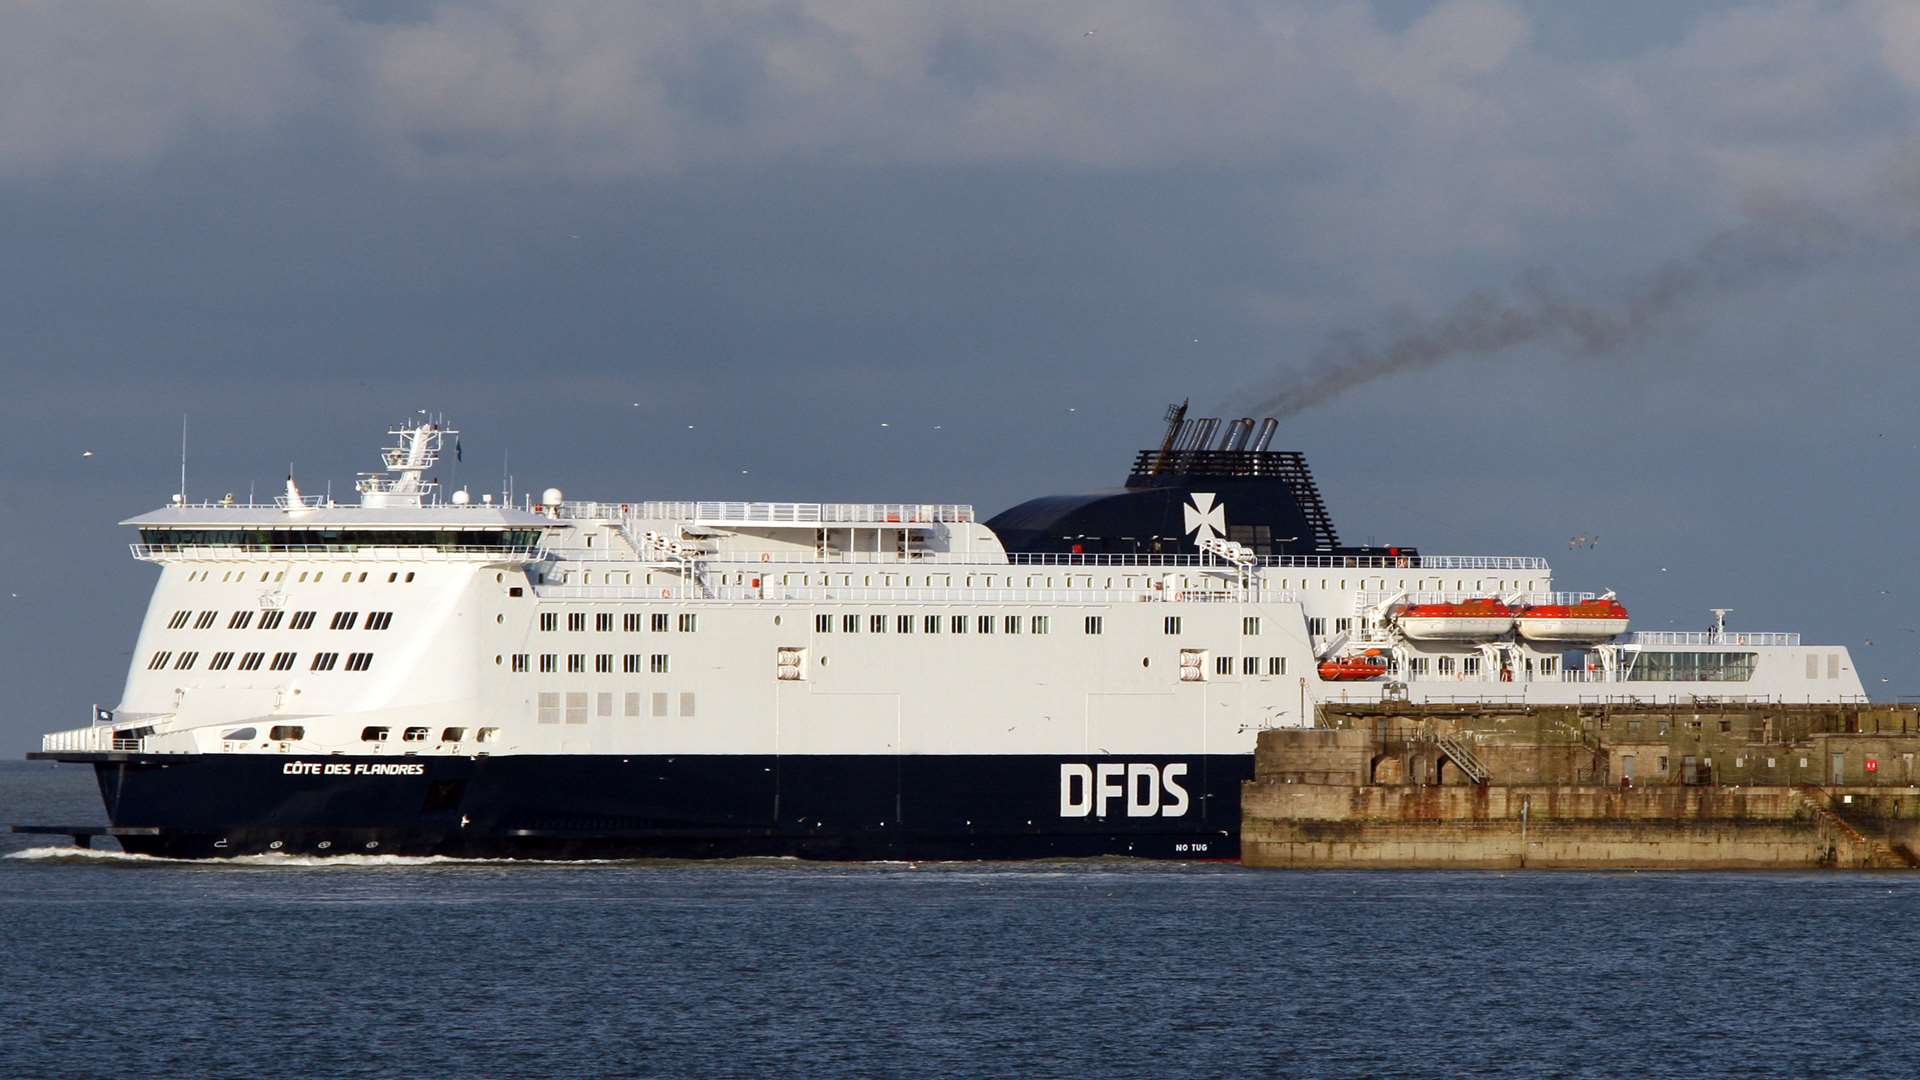 DFDS - has given shares to its staff.